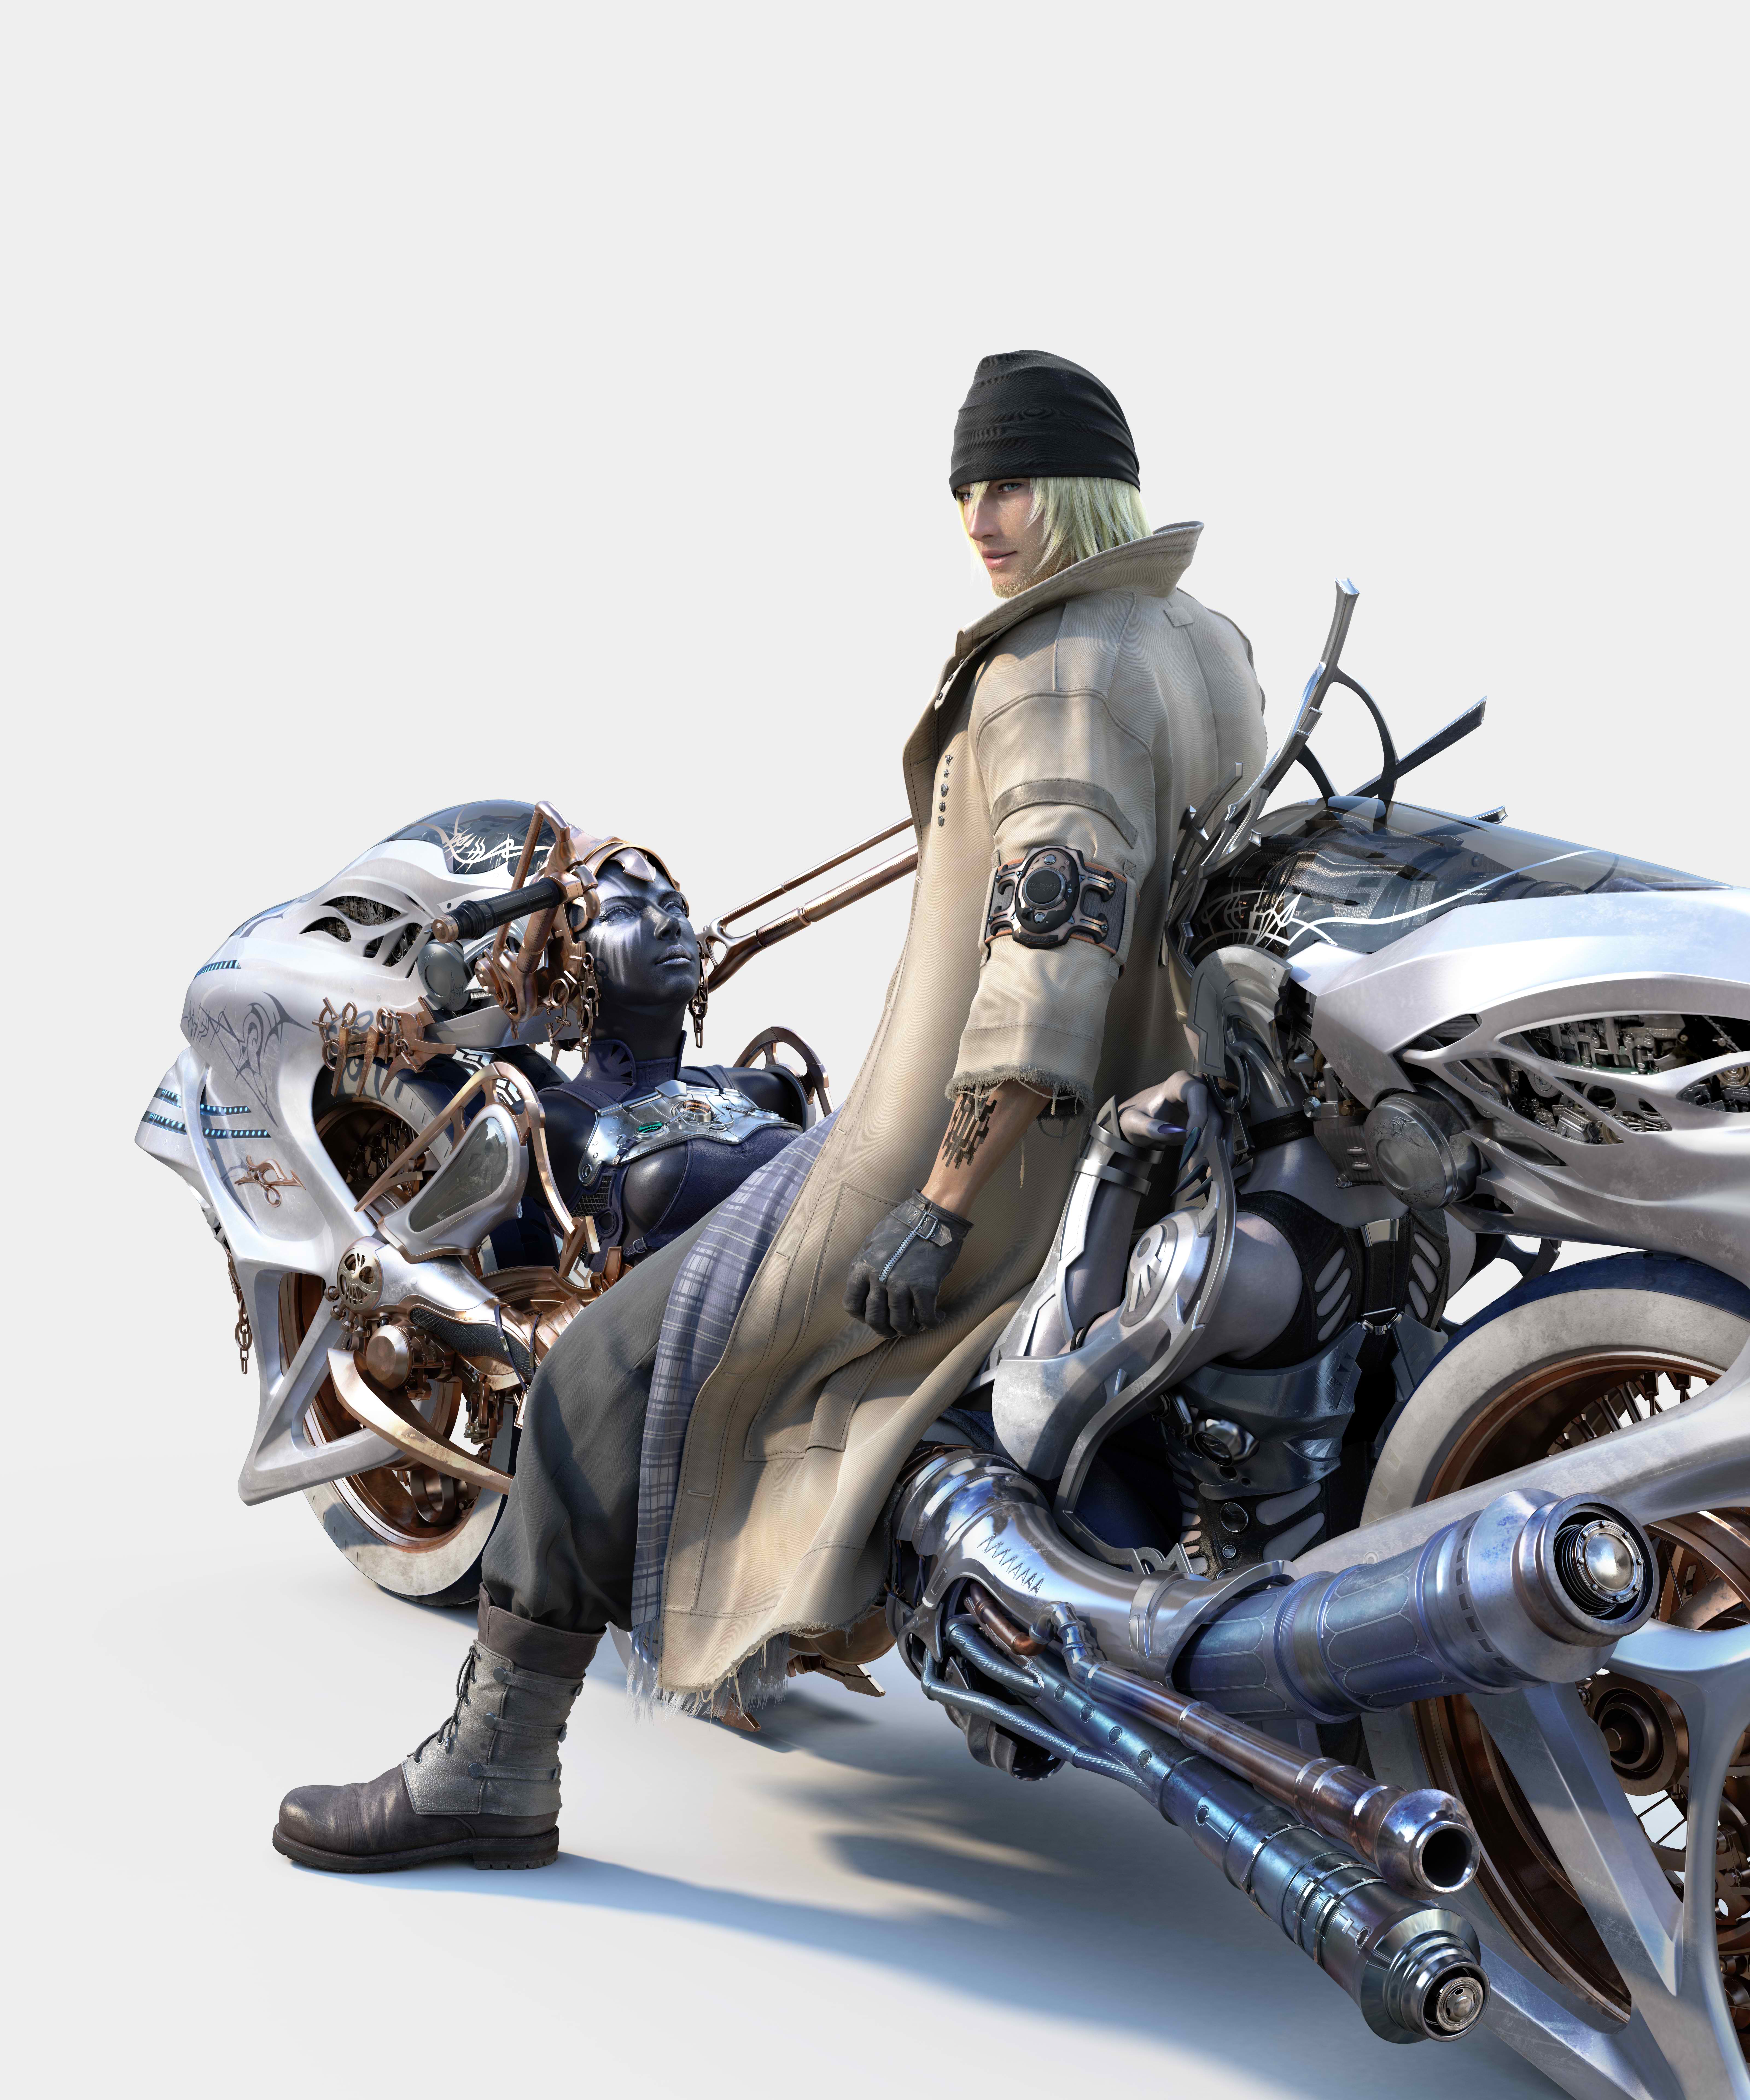 General 6400x7680 Final Fantasy XIII Snow Villiers portrait display video games video game men video game characters gloves hat motorcycle vehicle tattoo minimalism simple background white background